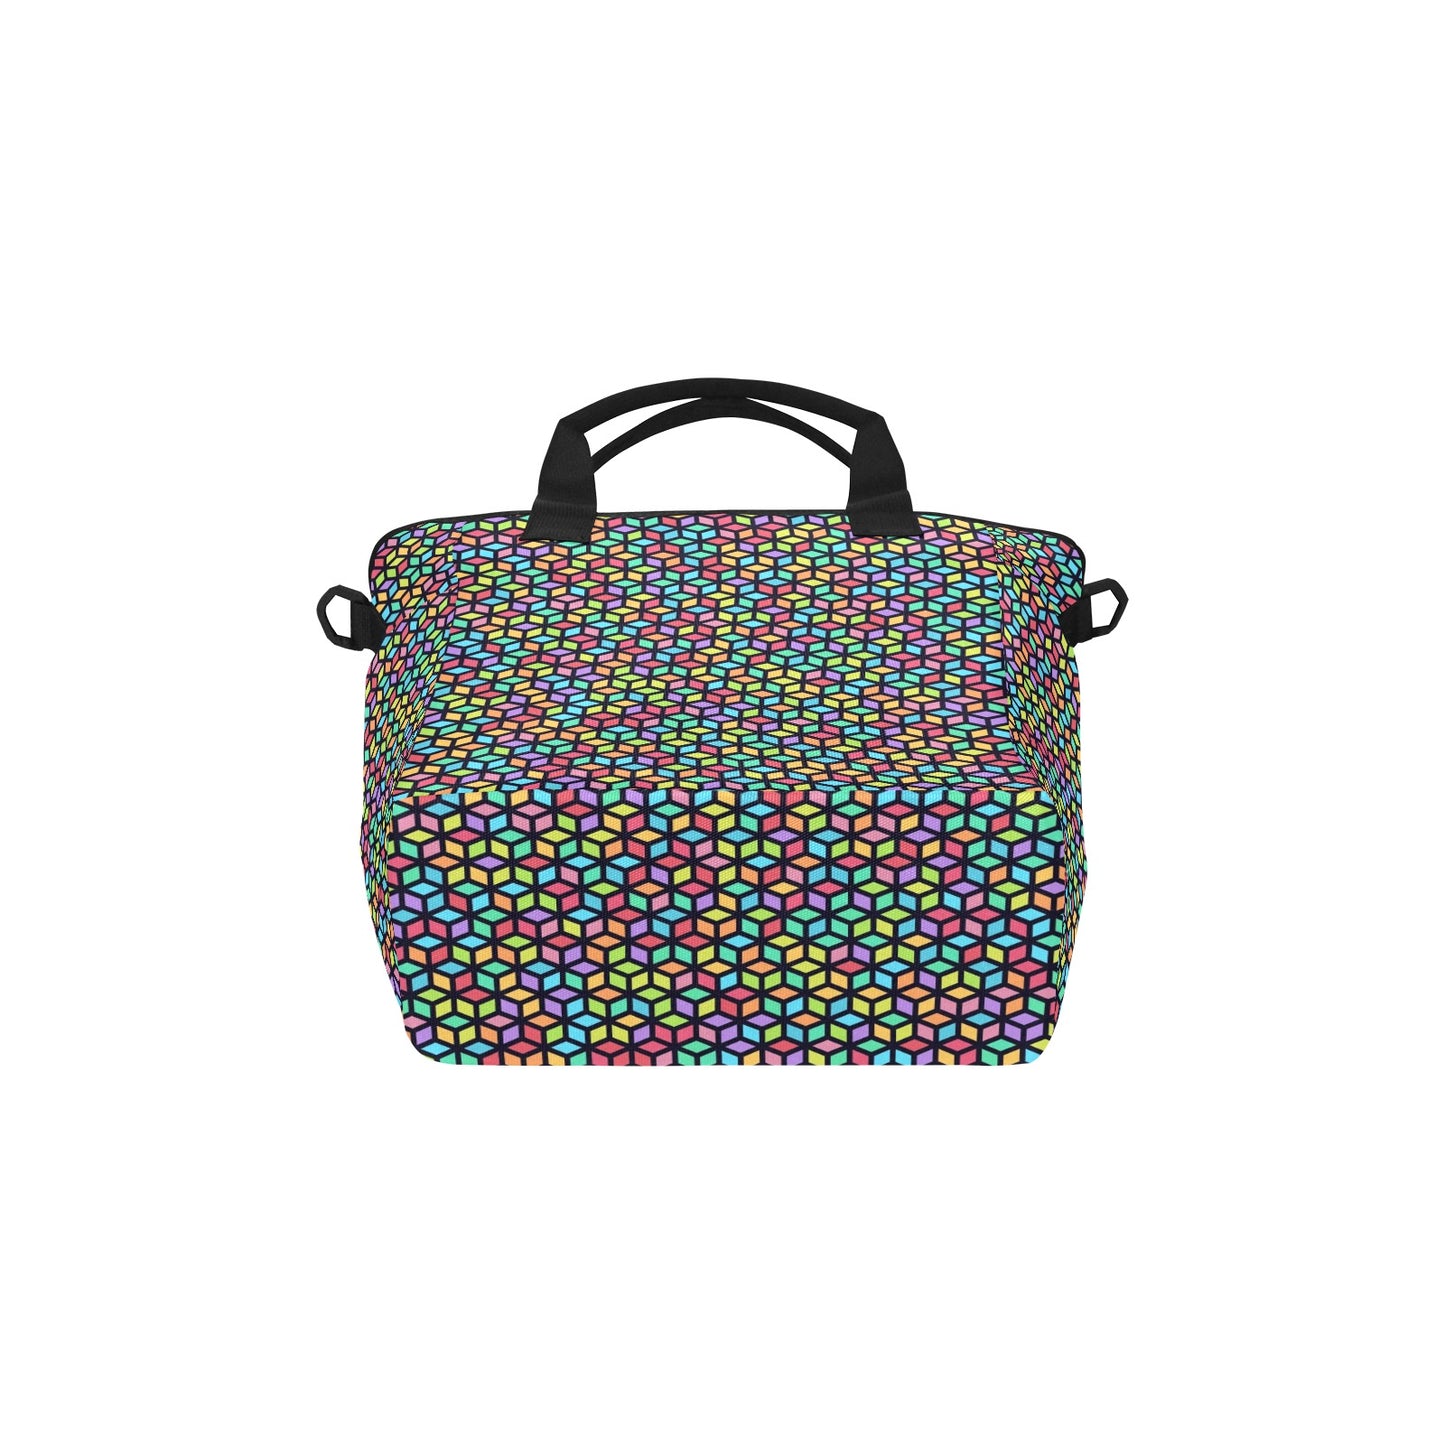 Tesselate - Tote Bag with Shoulder Strap Nylon Tote Bag